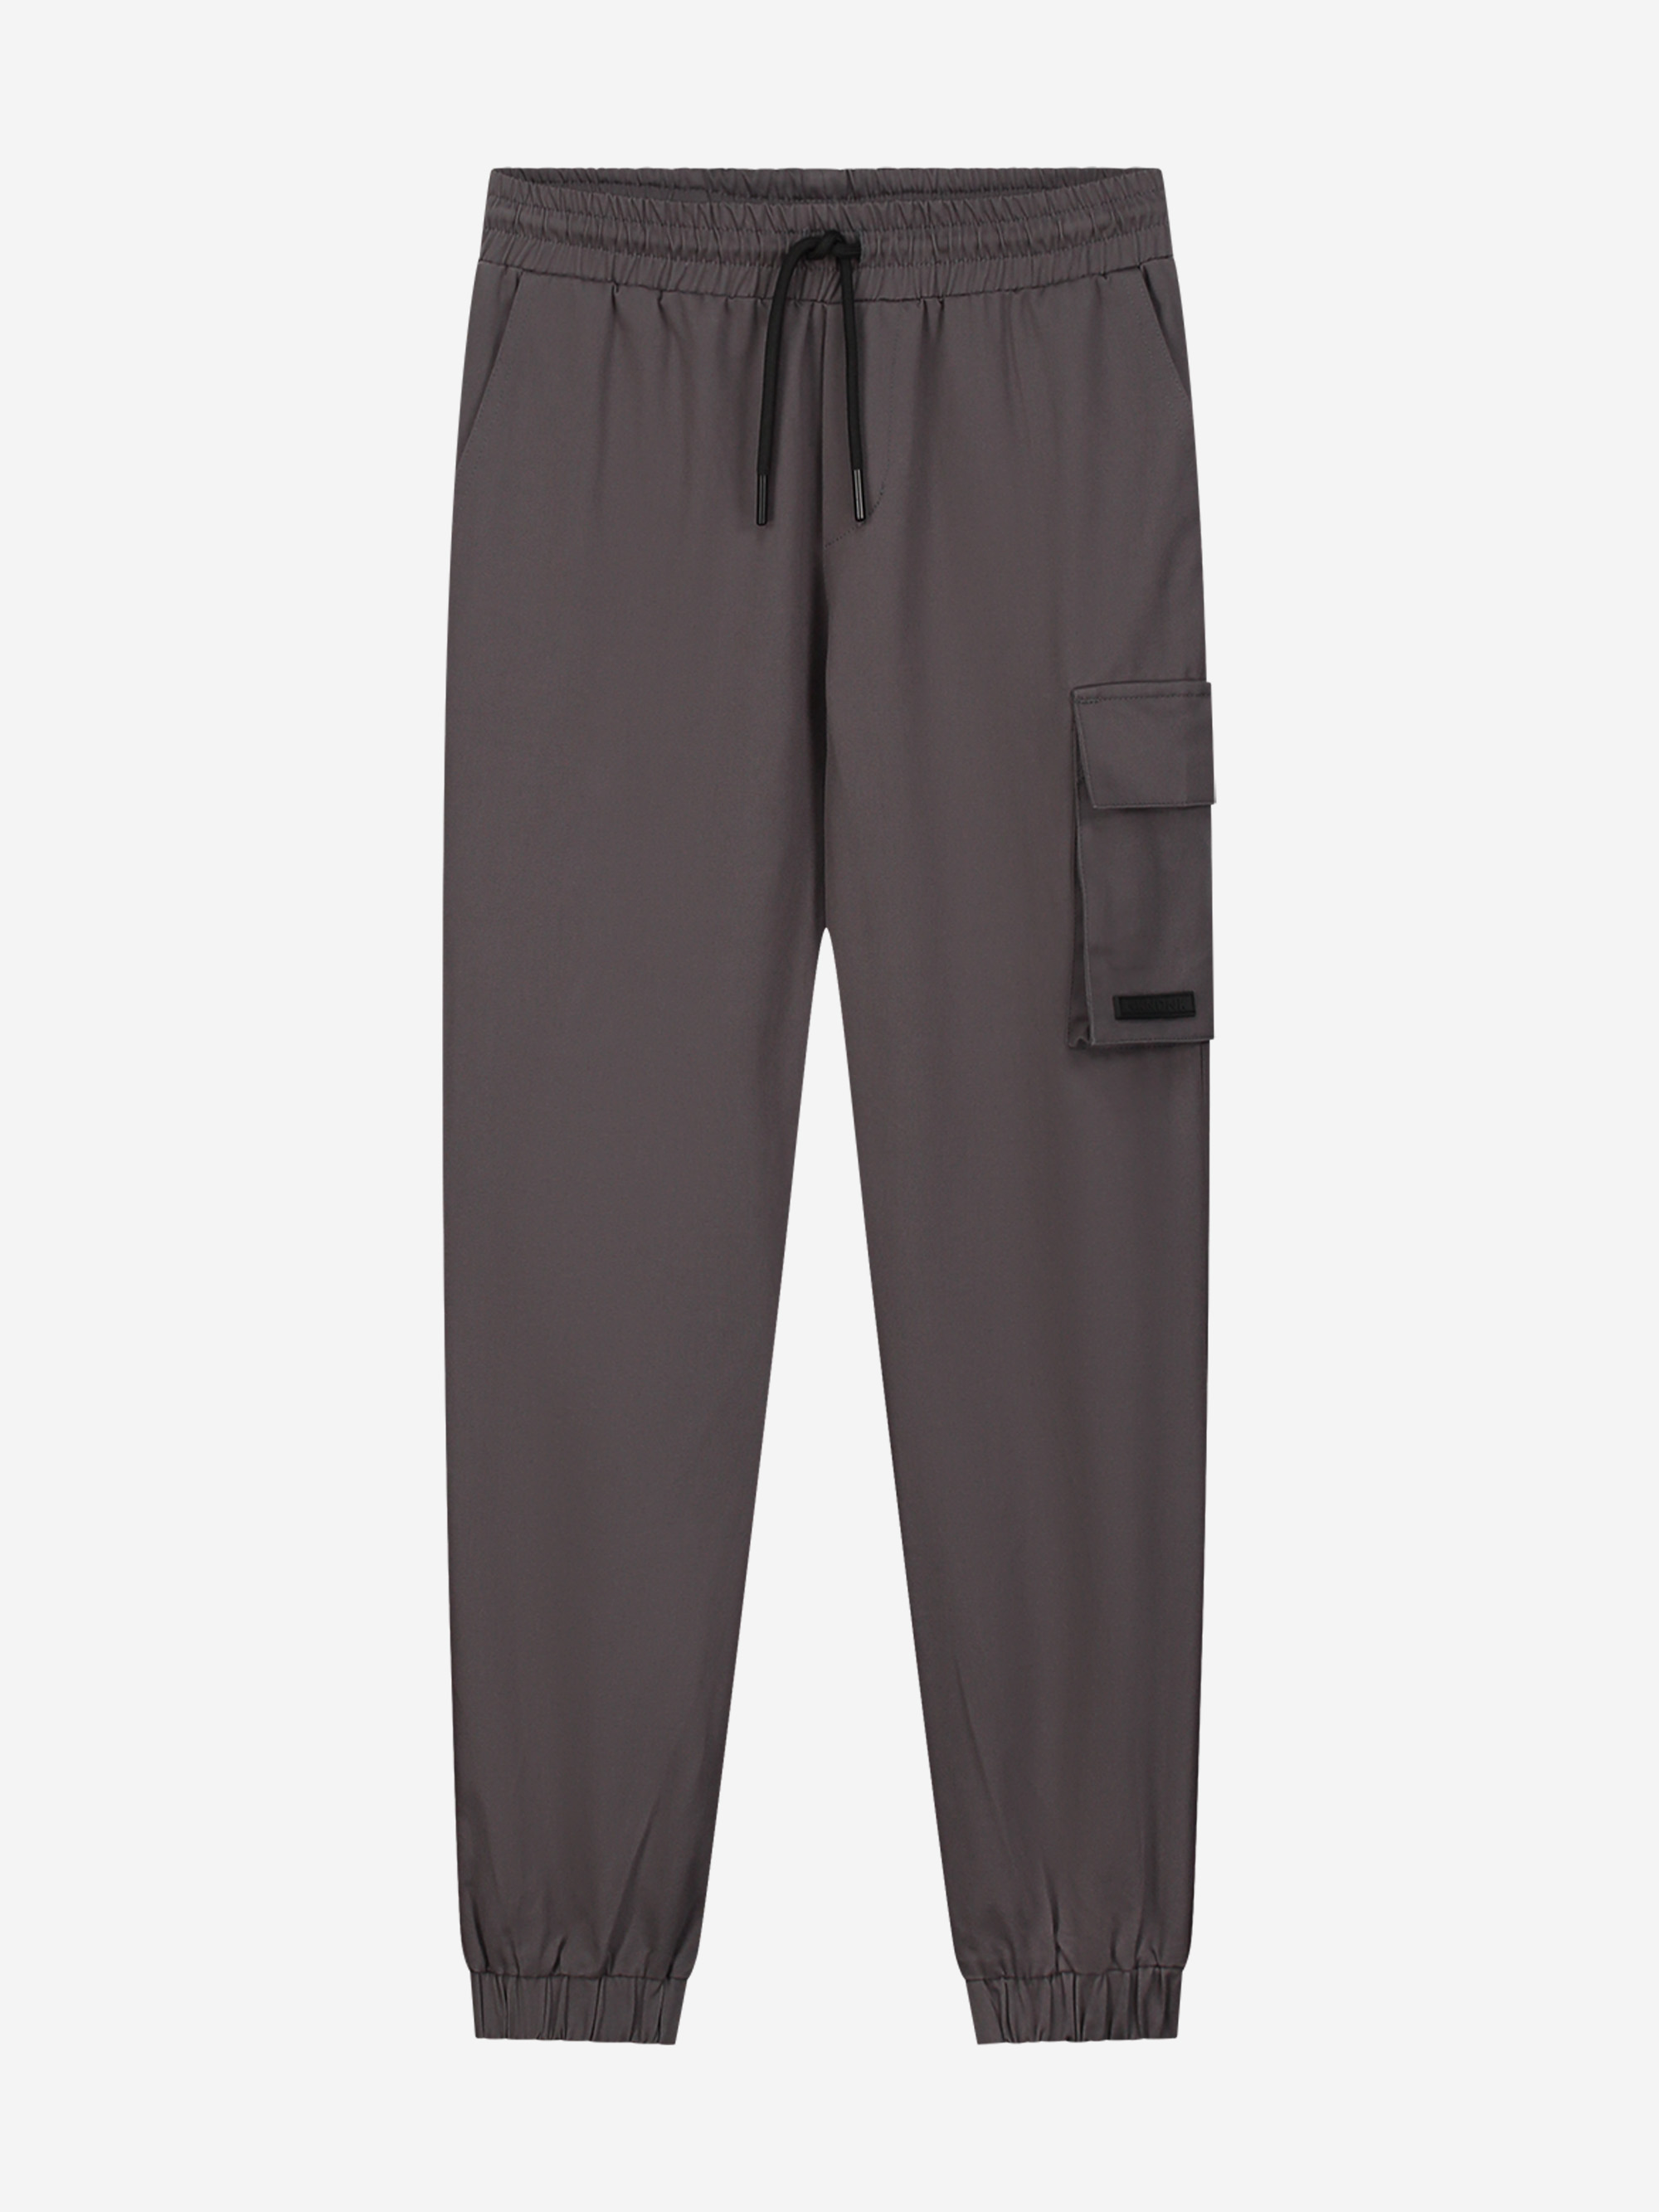 Trouser with side pocket